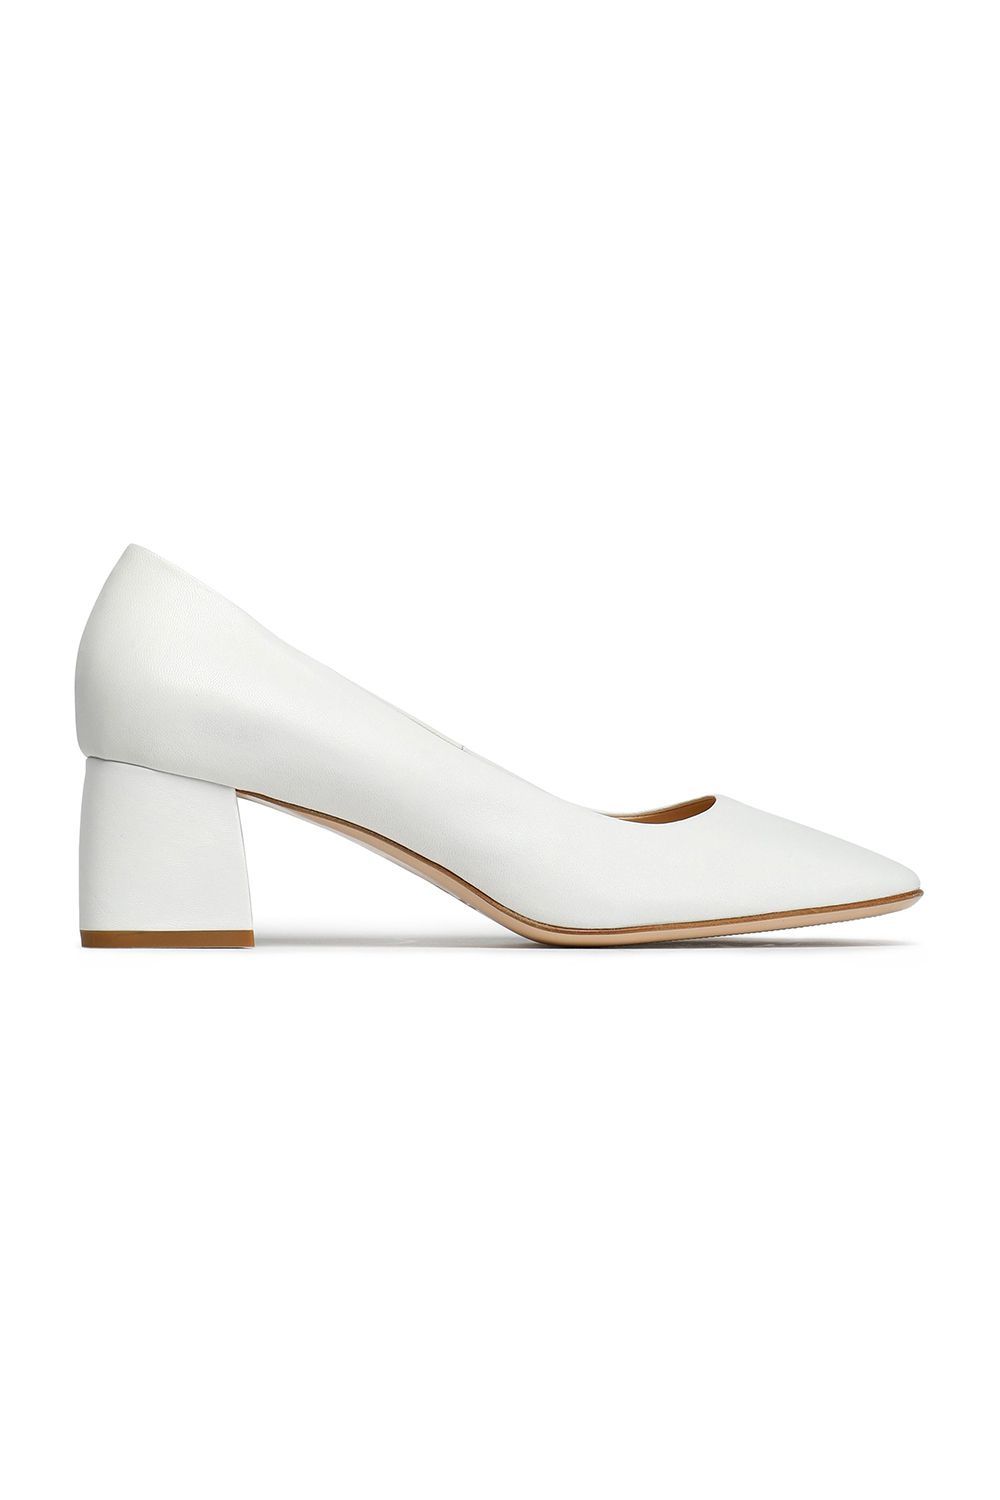 The Best Shoes from The Outnet's Sale 